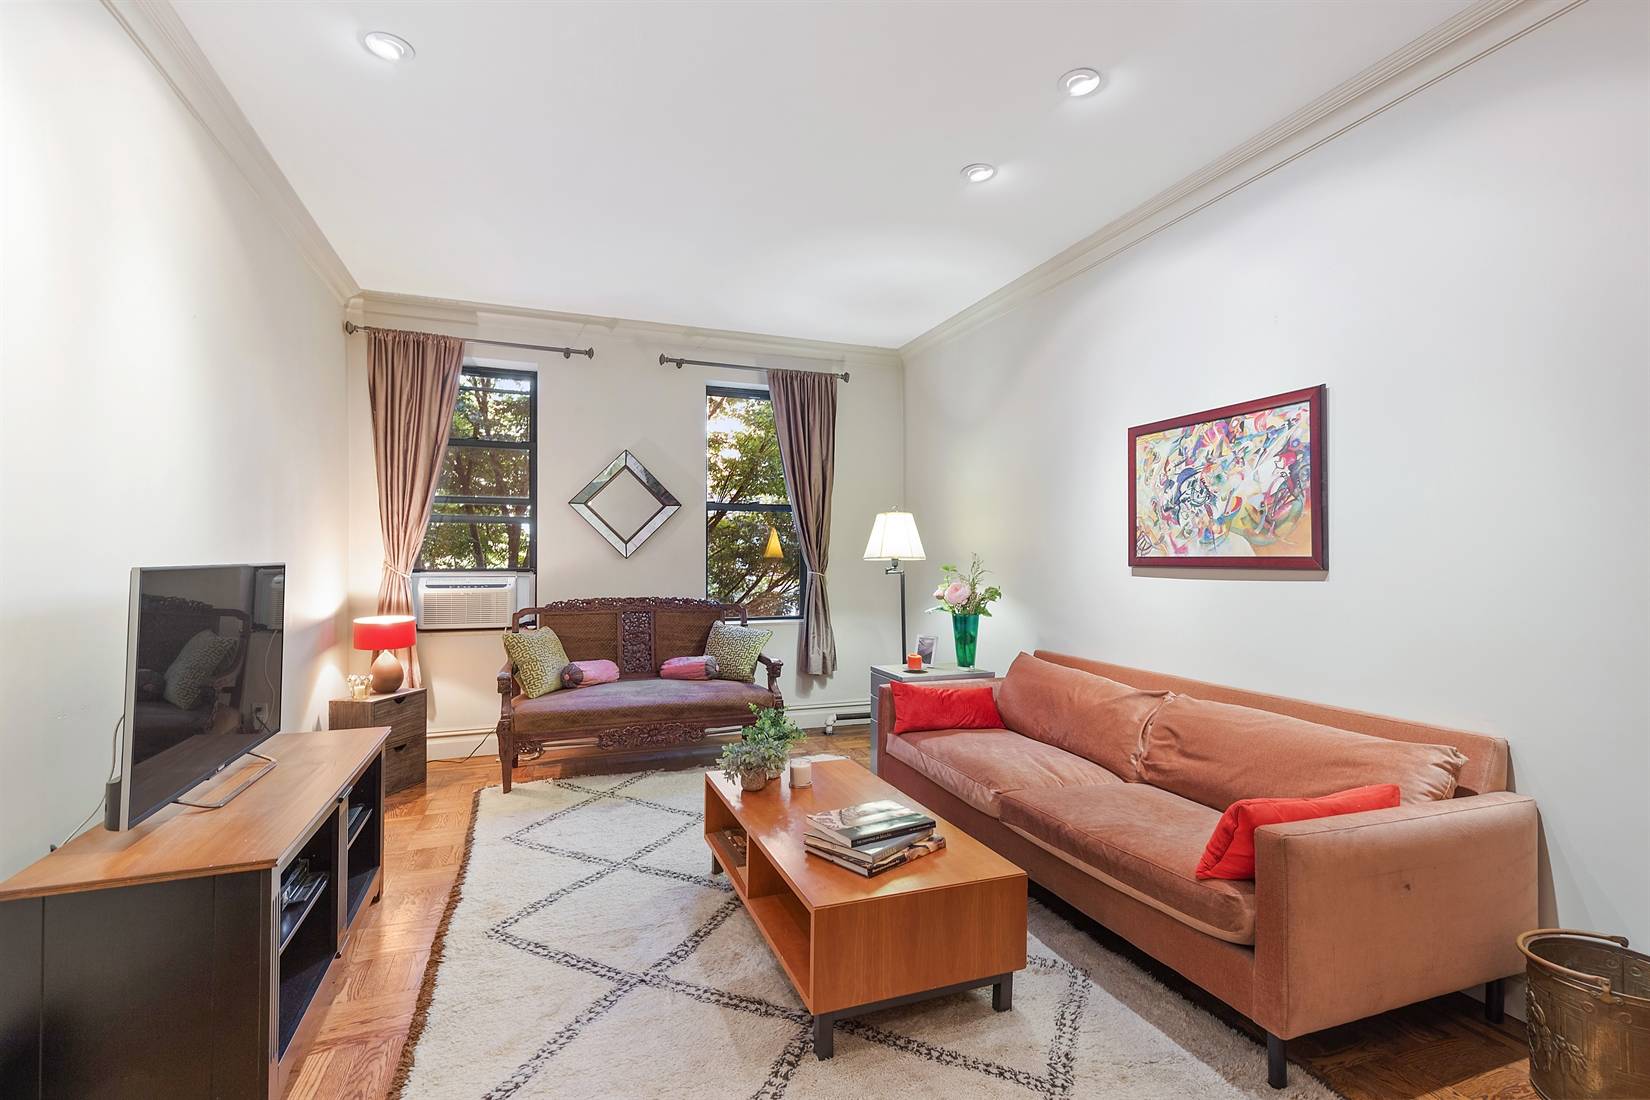 SERENE ONE BEDROOM OVERLOOKING TREE LINED CABRINI BLVD Surrounded by pretty leafy views from all windows, this prewar gem is the calm oasis that every HOME should be.